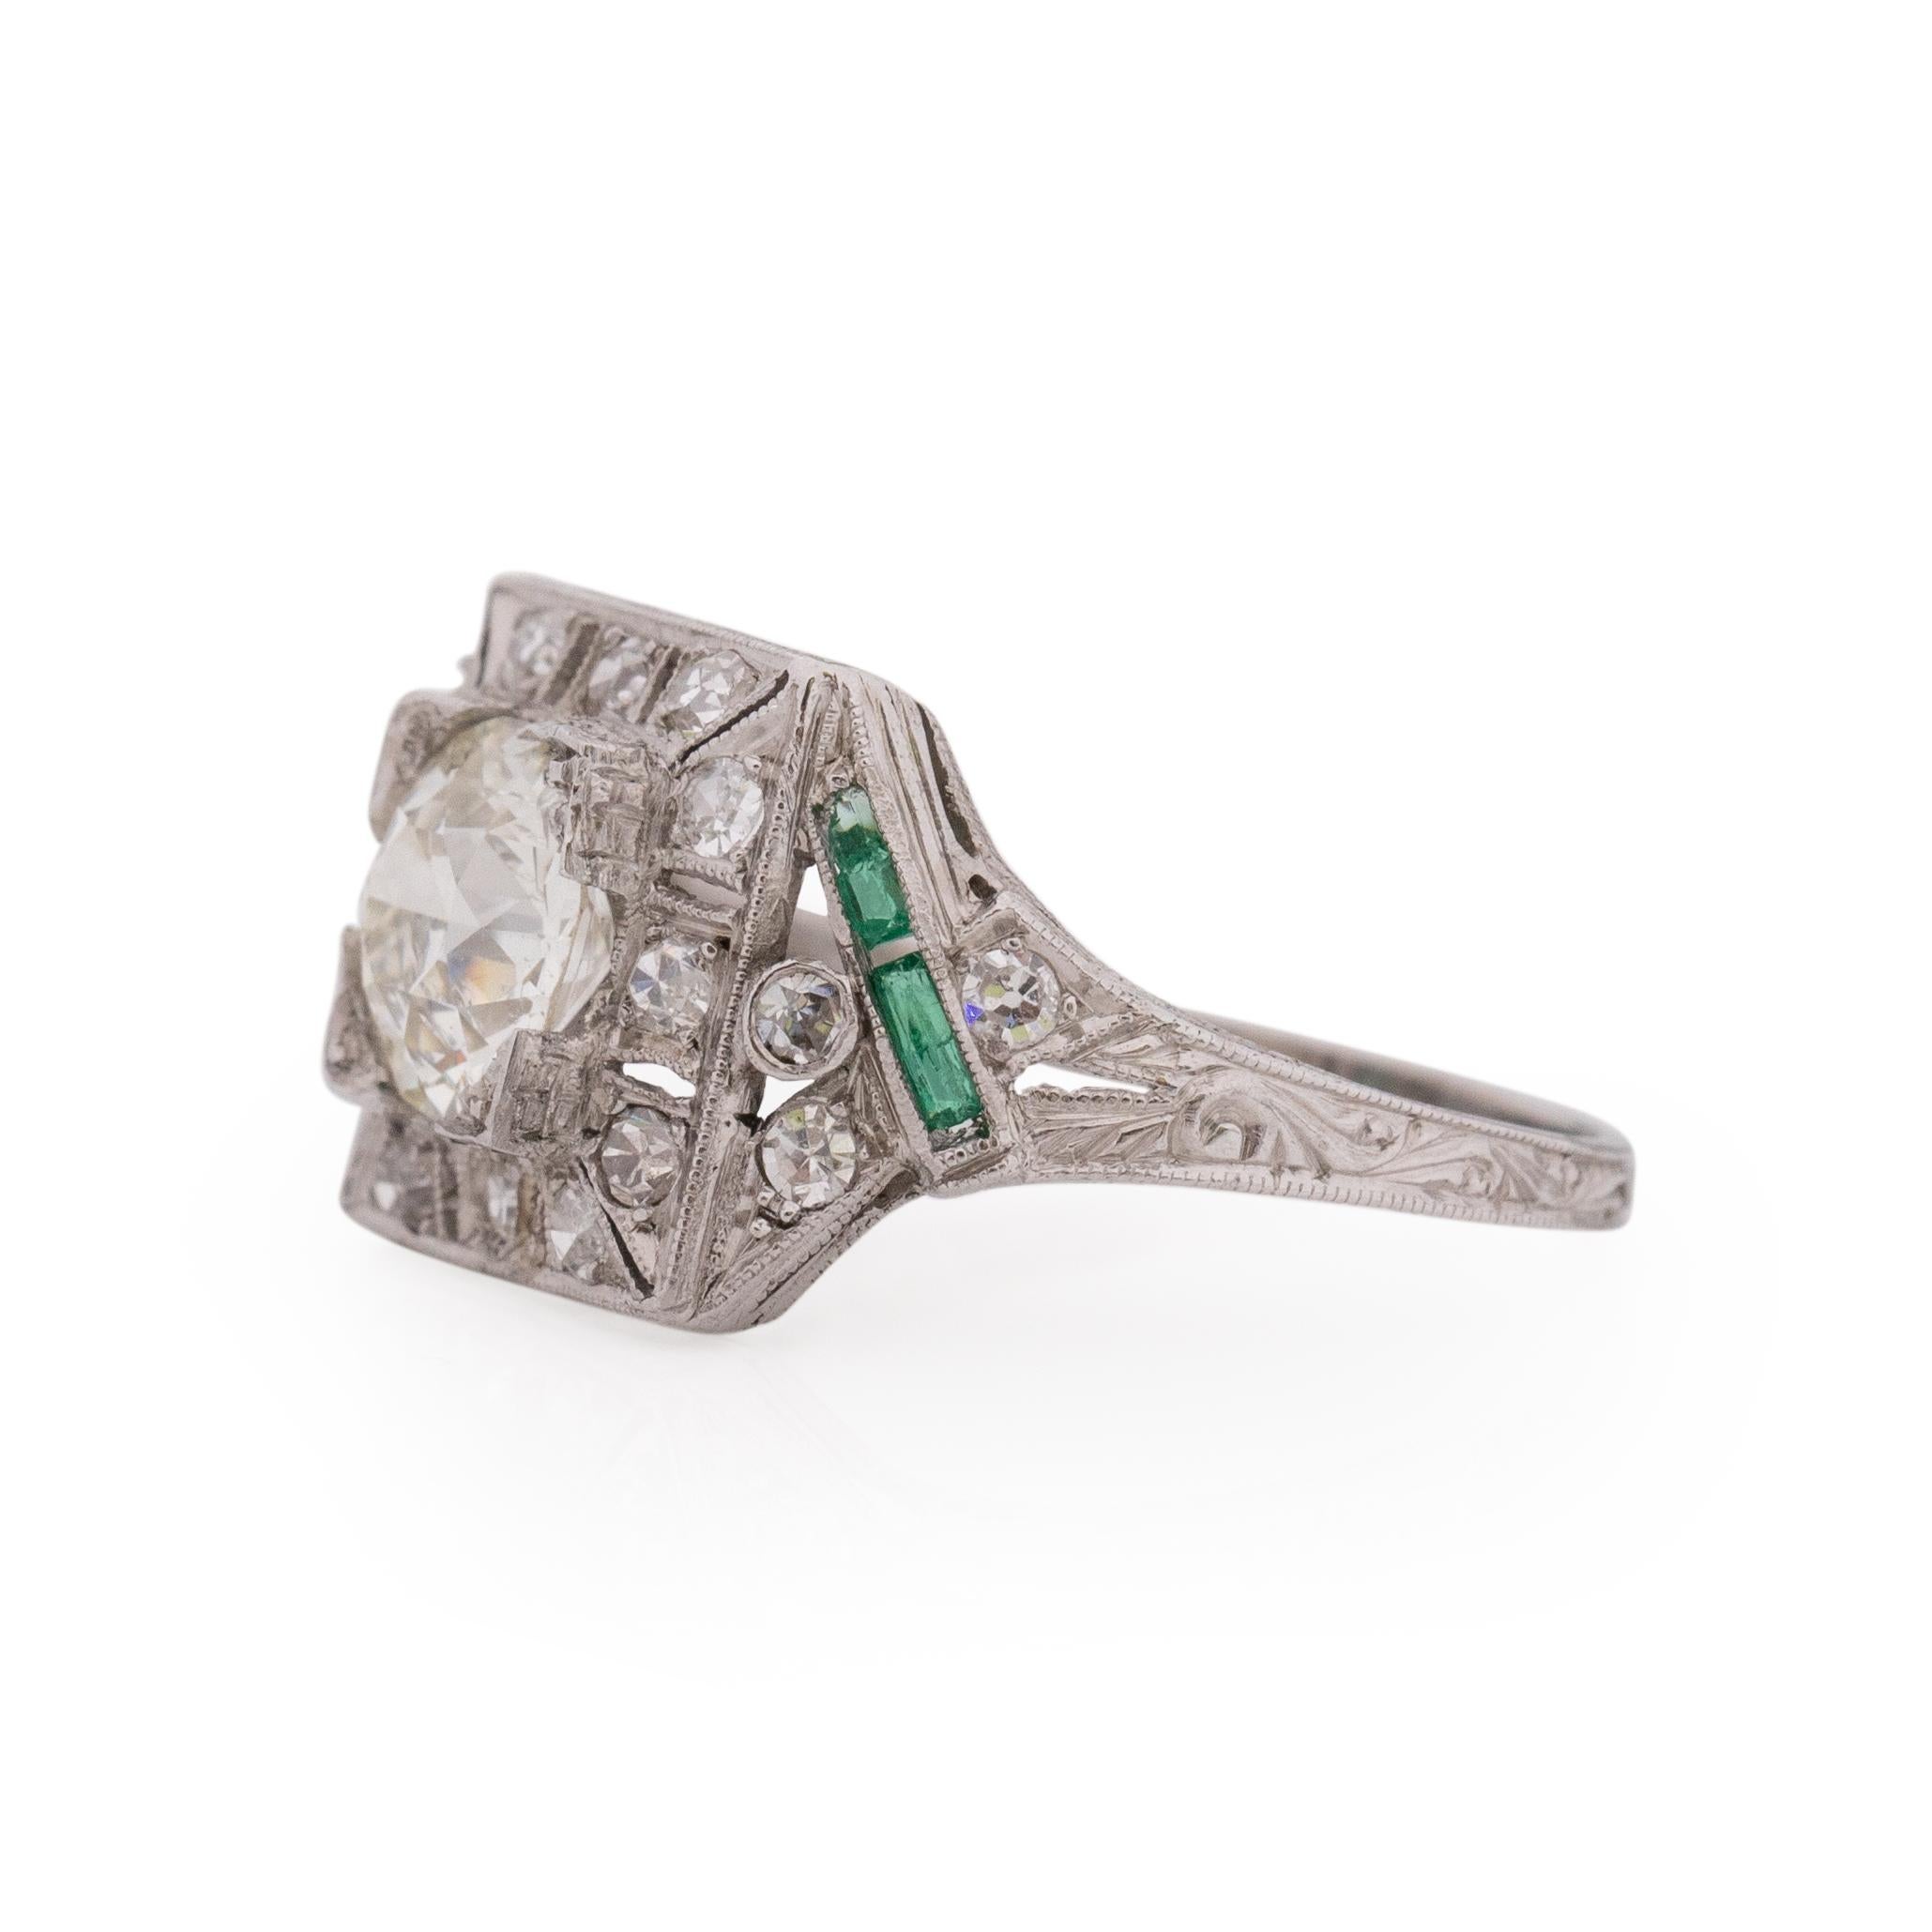 Old European Cut Art Deco Platinum 1.26 Ct GIA Certified Diamond and Emerald Vintage Ring